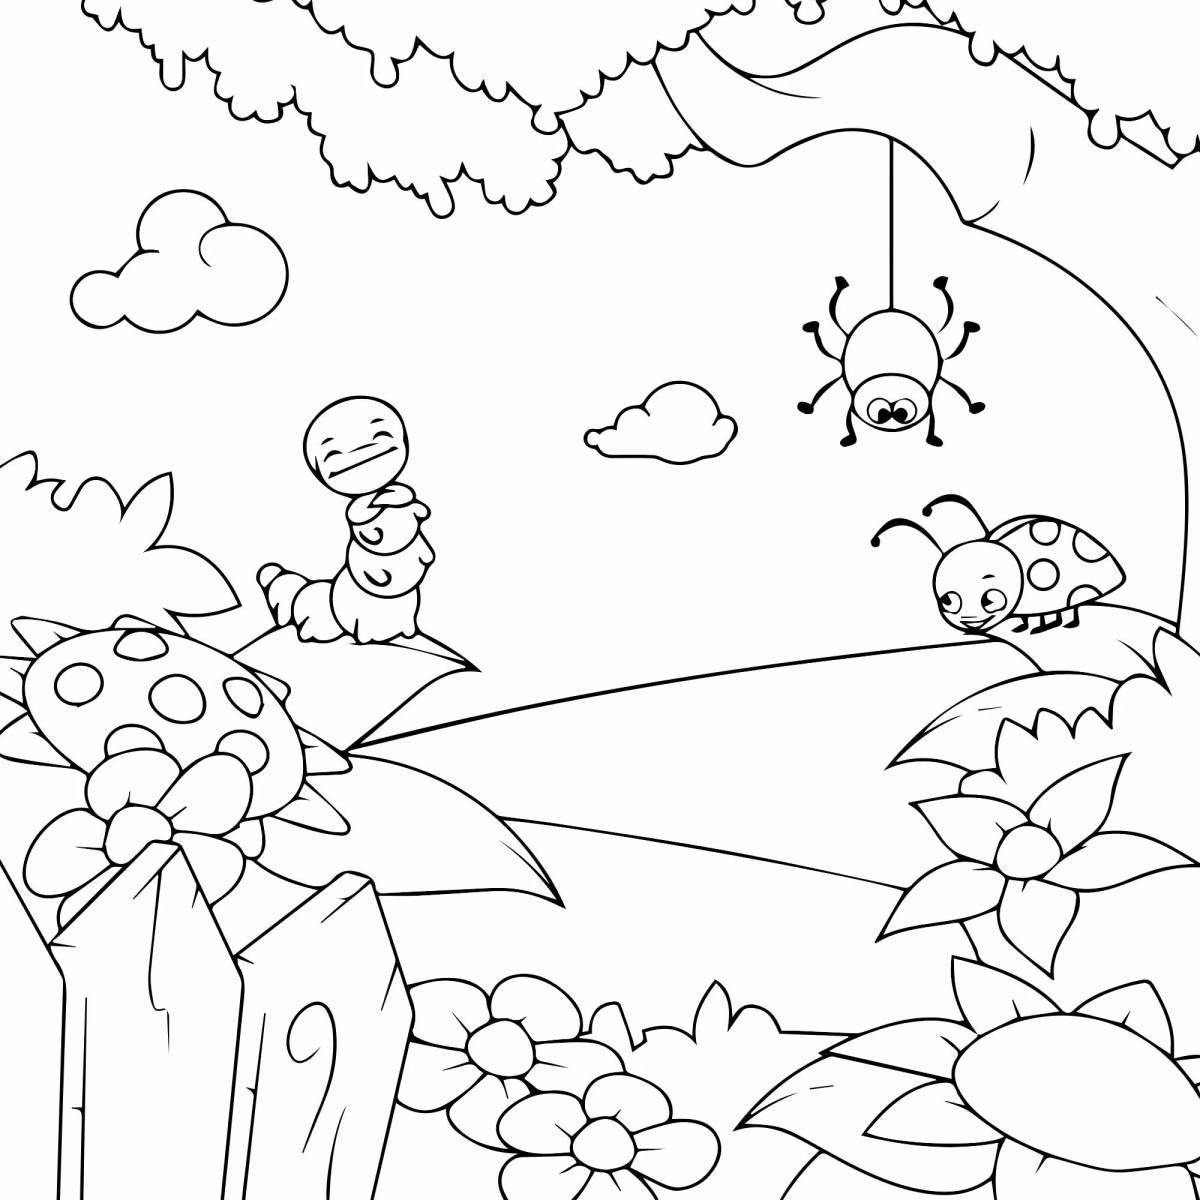 Coloring page blissful spring nature